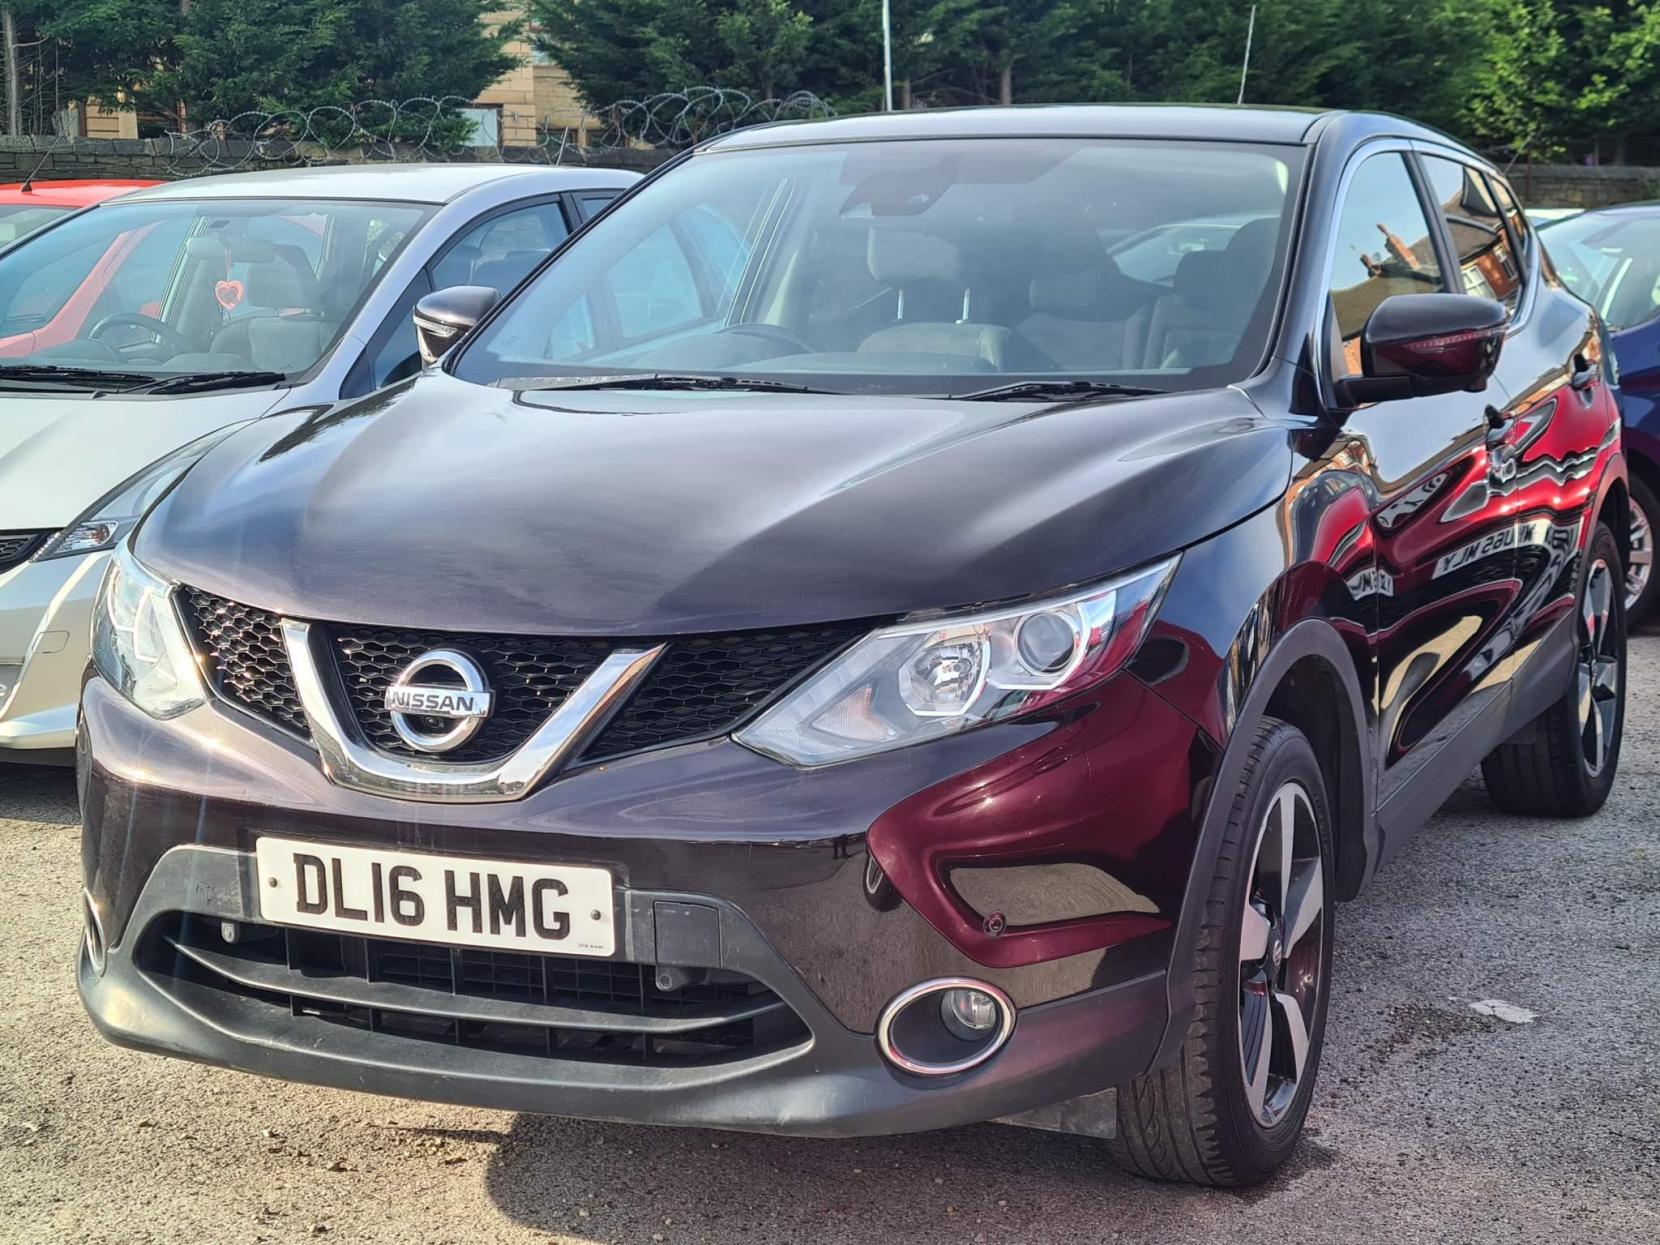 Nissan Qashqai 1.5 dCi N-Connecta 2WD Euro 6 (s/s) 5dr